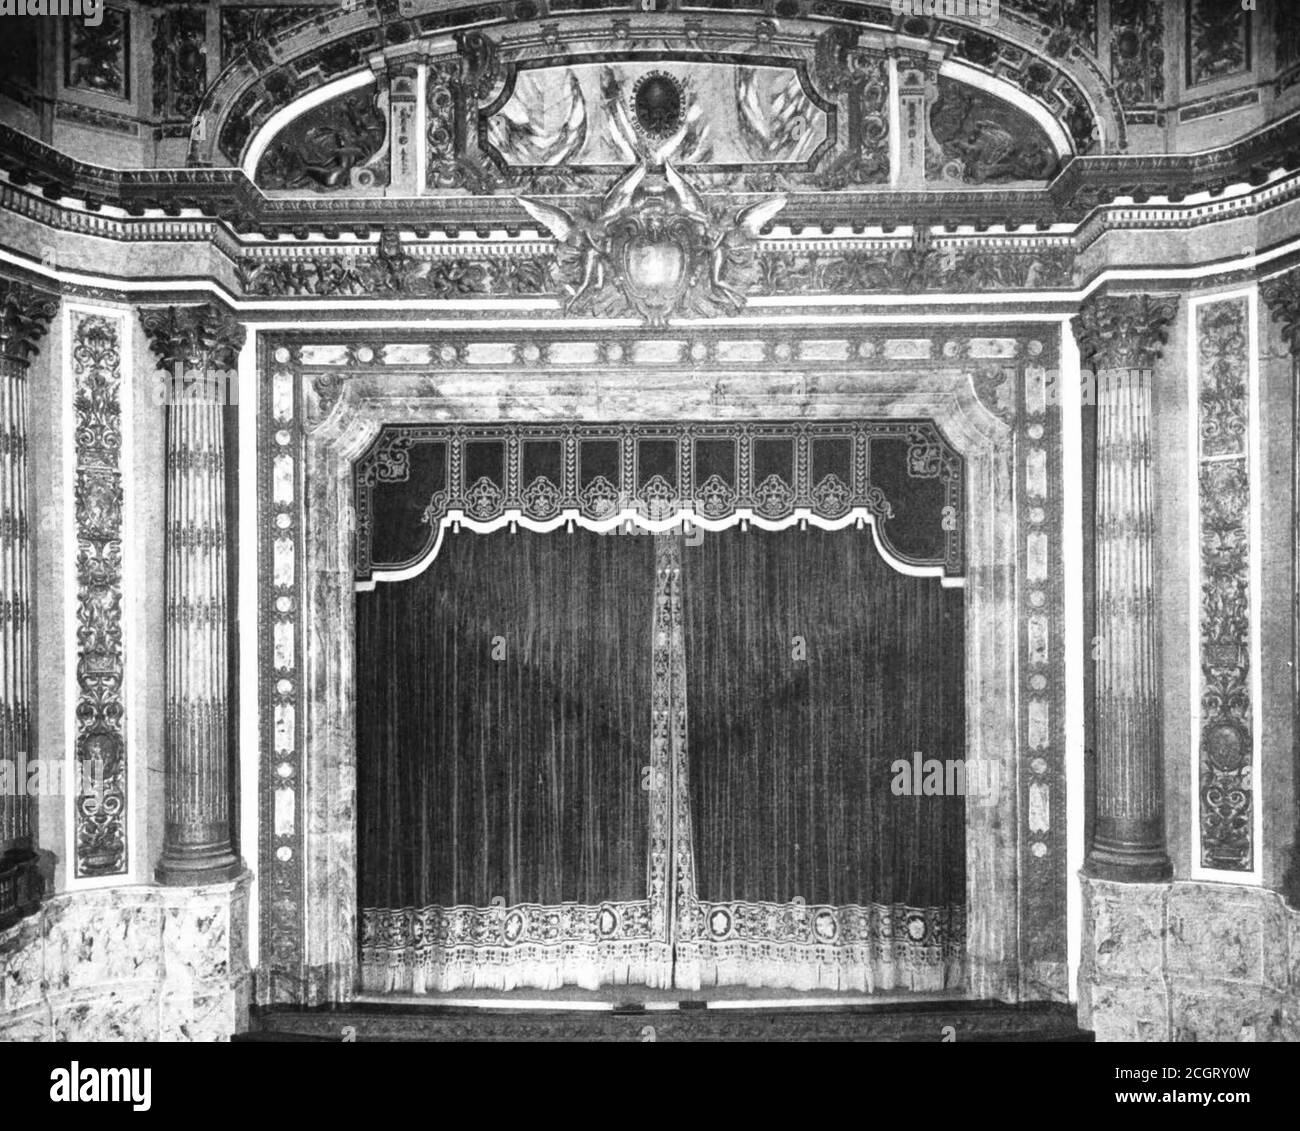 View of the stage of the New Theatre on Central Park West in New York City., circa 1909 Stock Photo